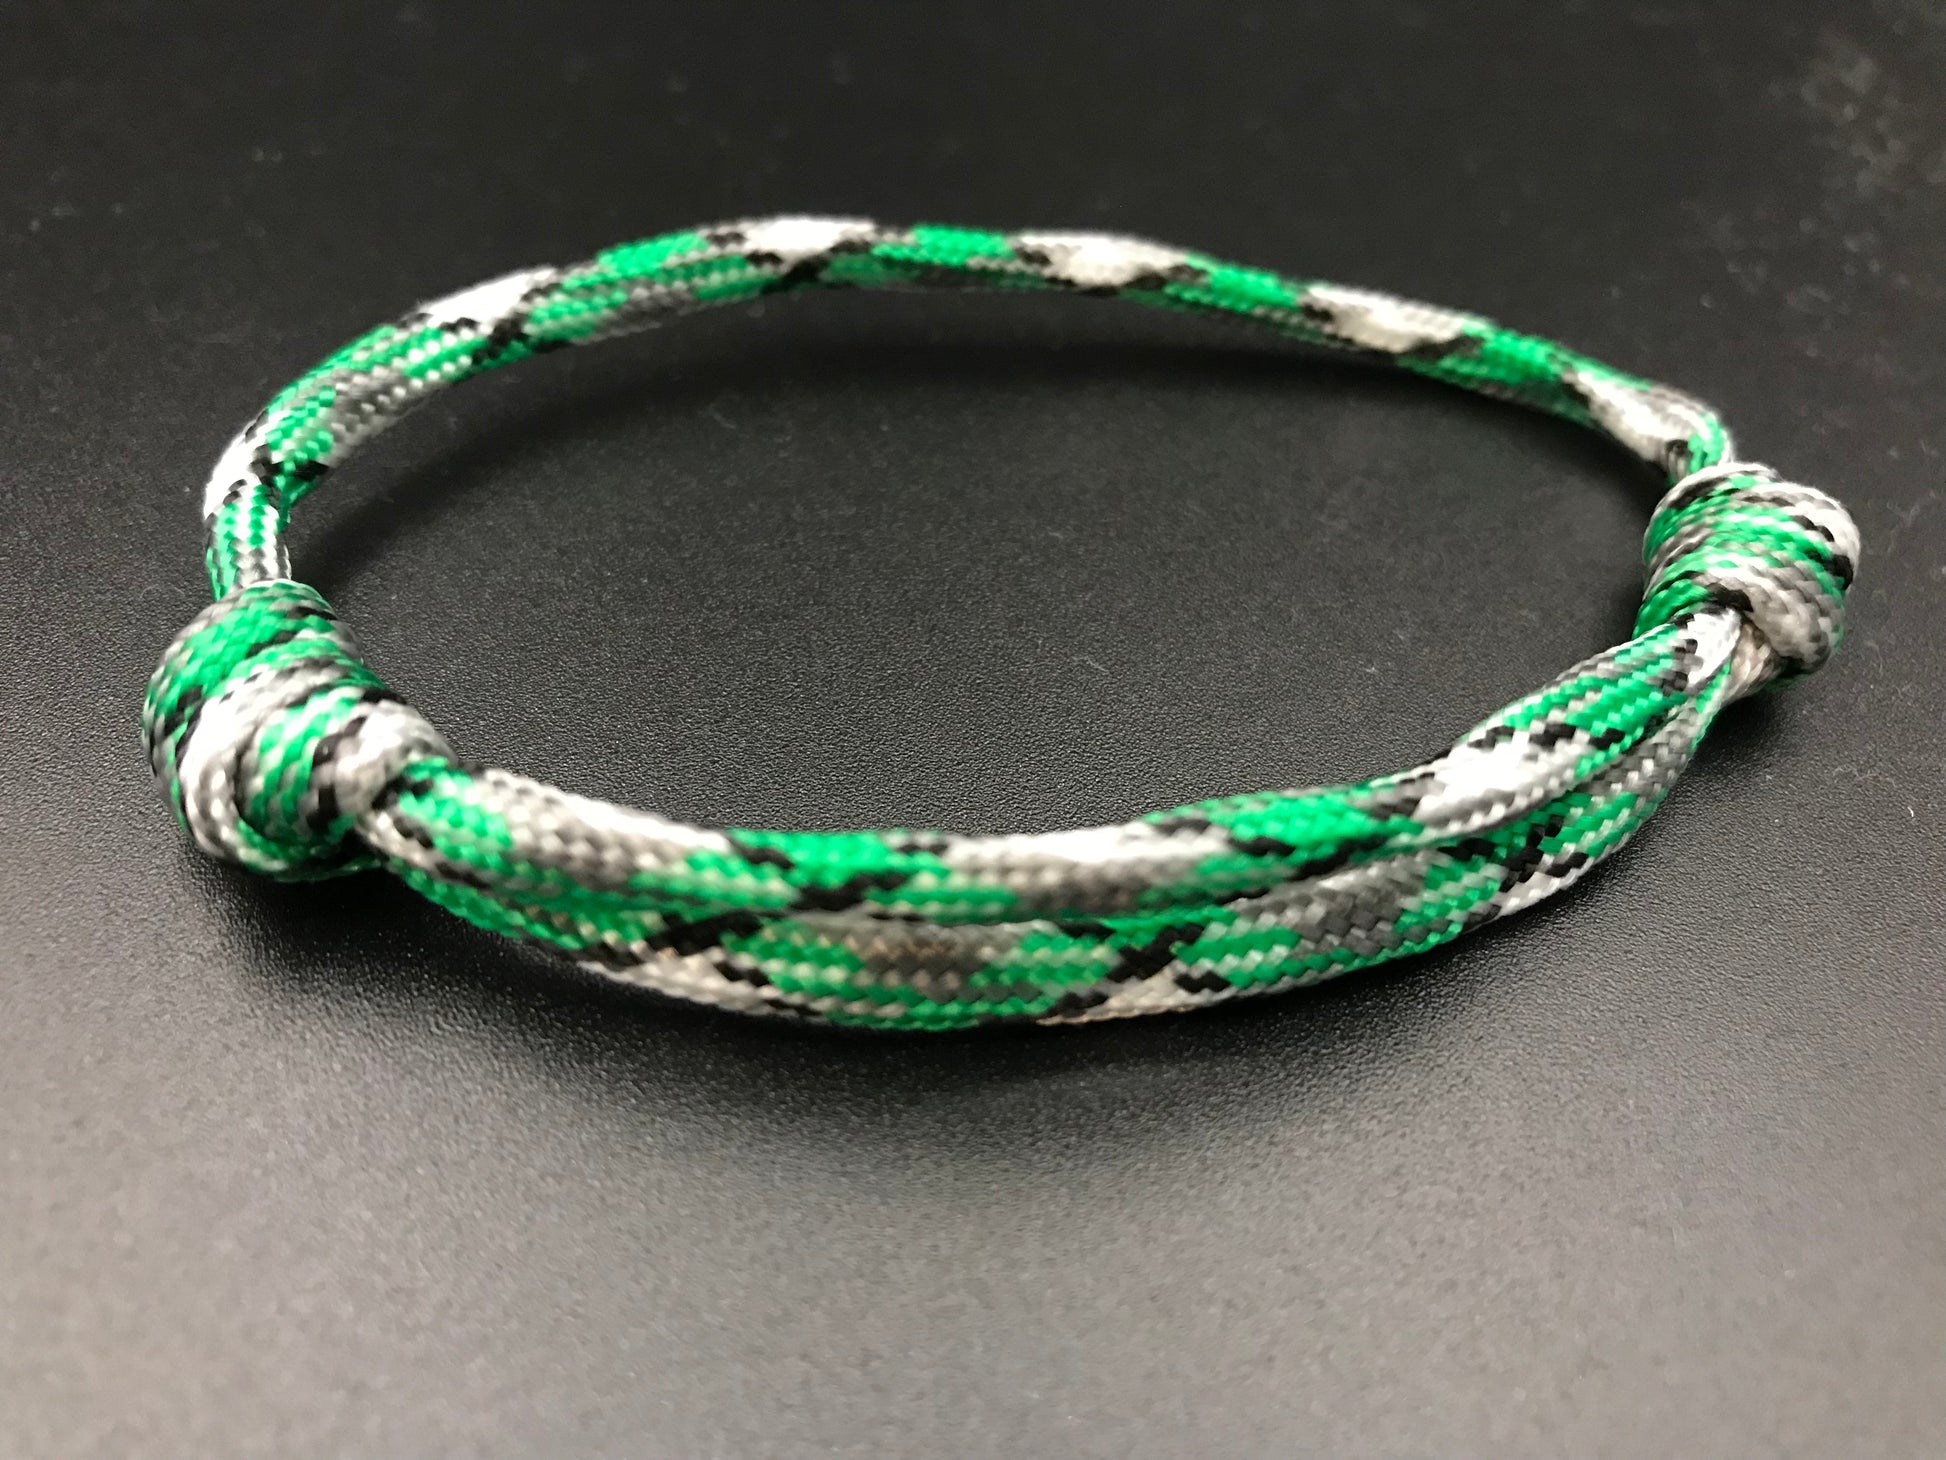 Paracord friendship bracelet In green - grey camo light weight and adjustable